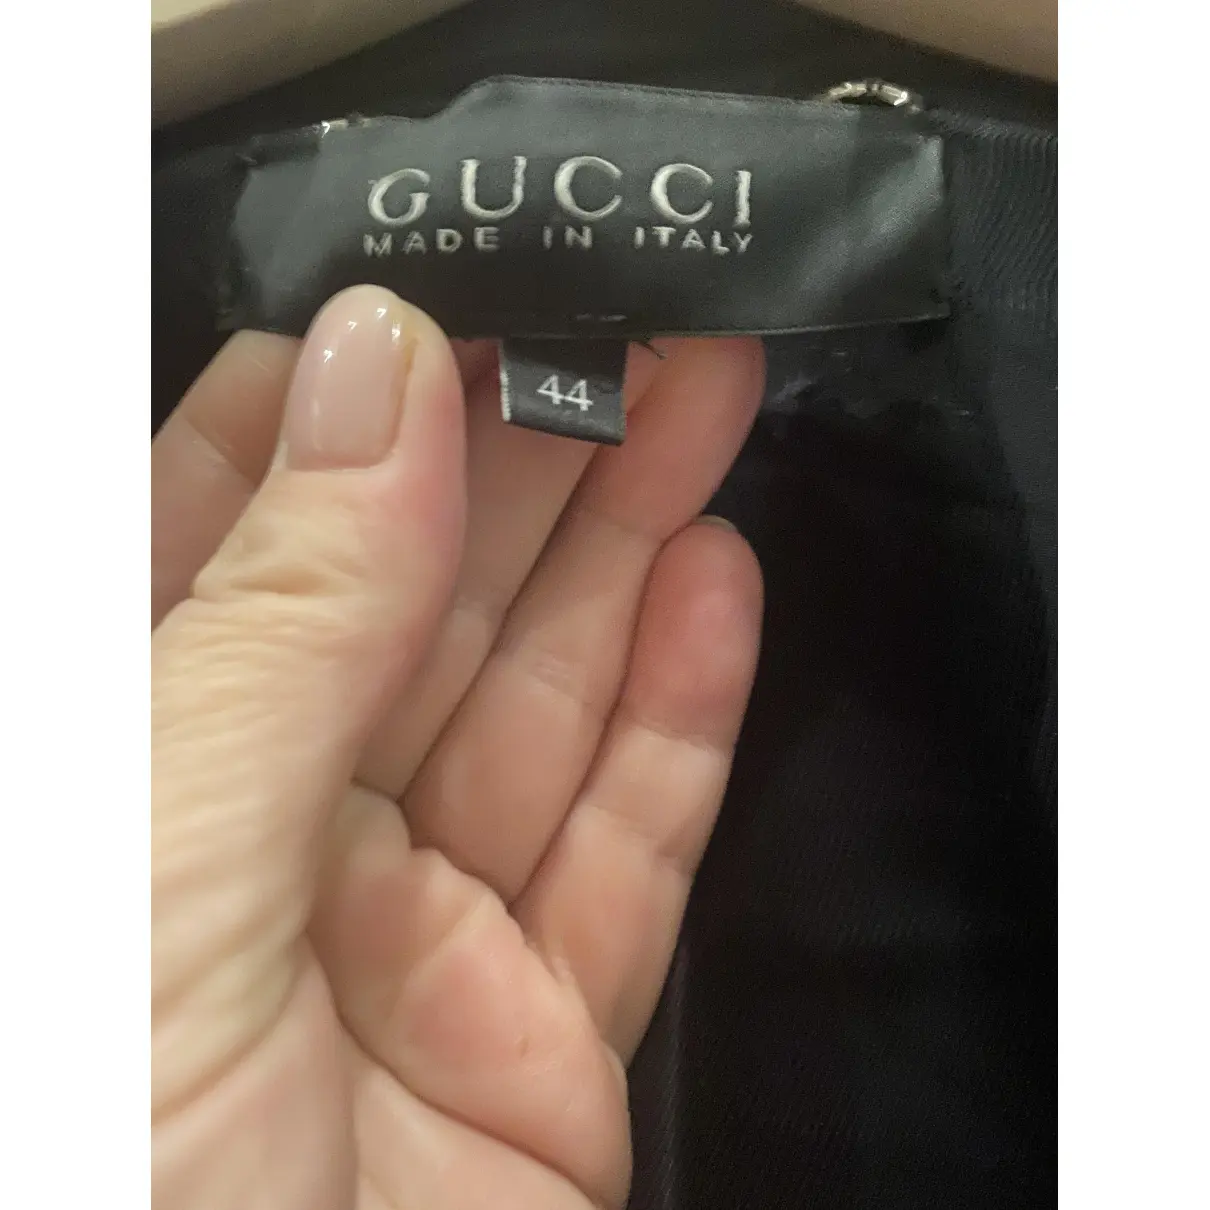 Leather jacket Gucci